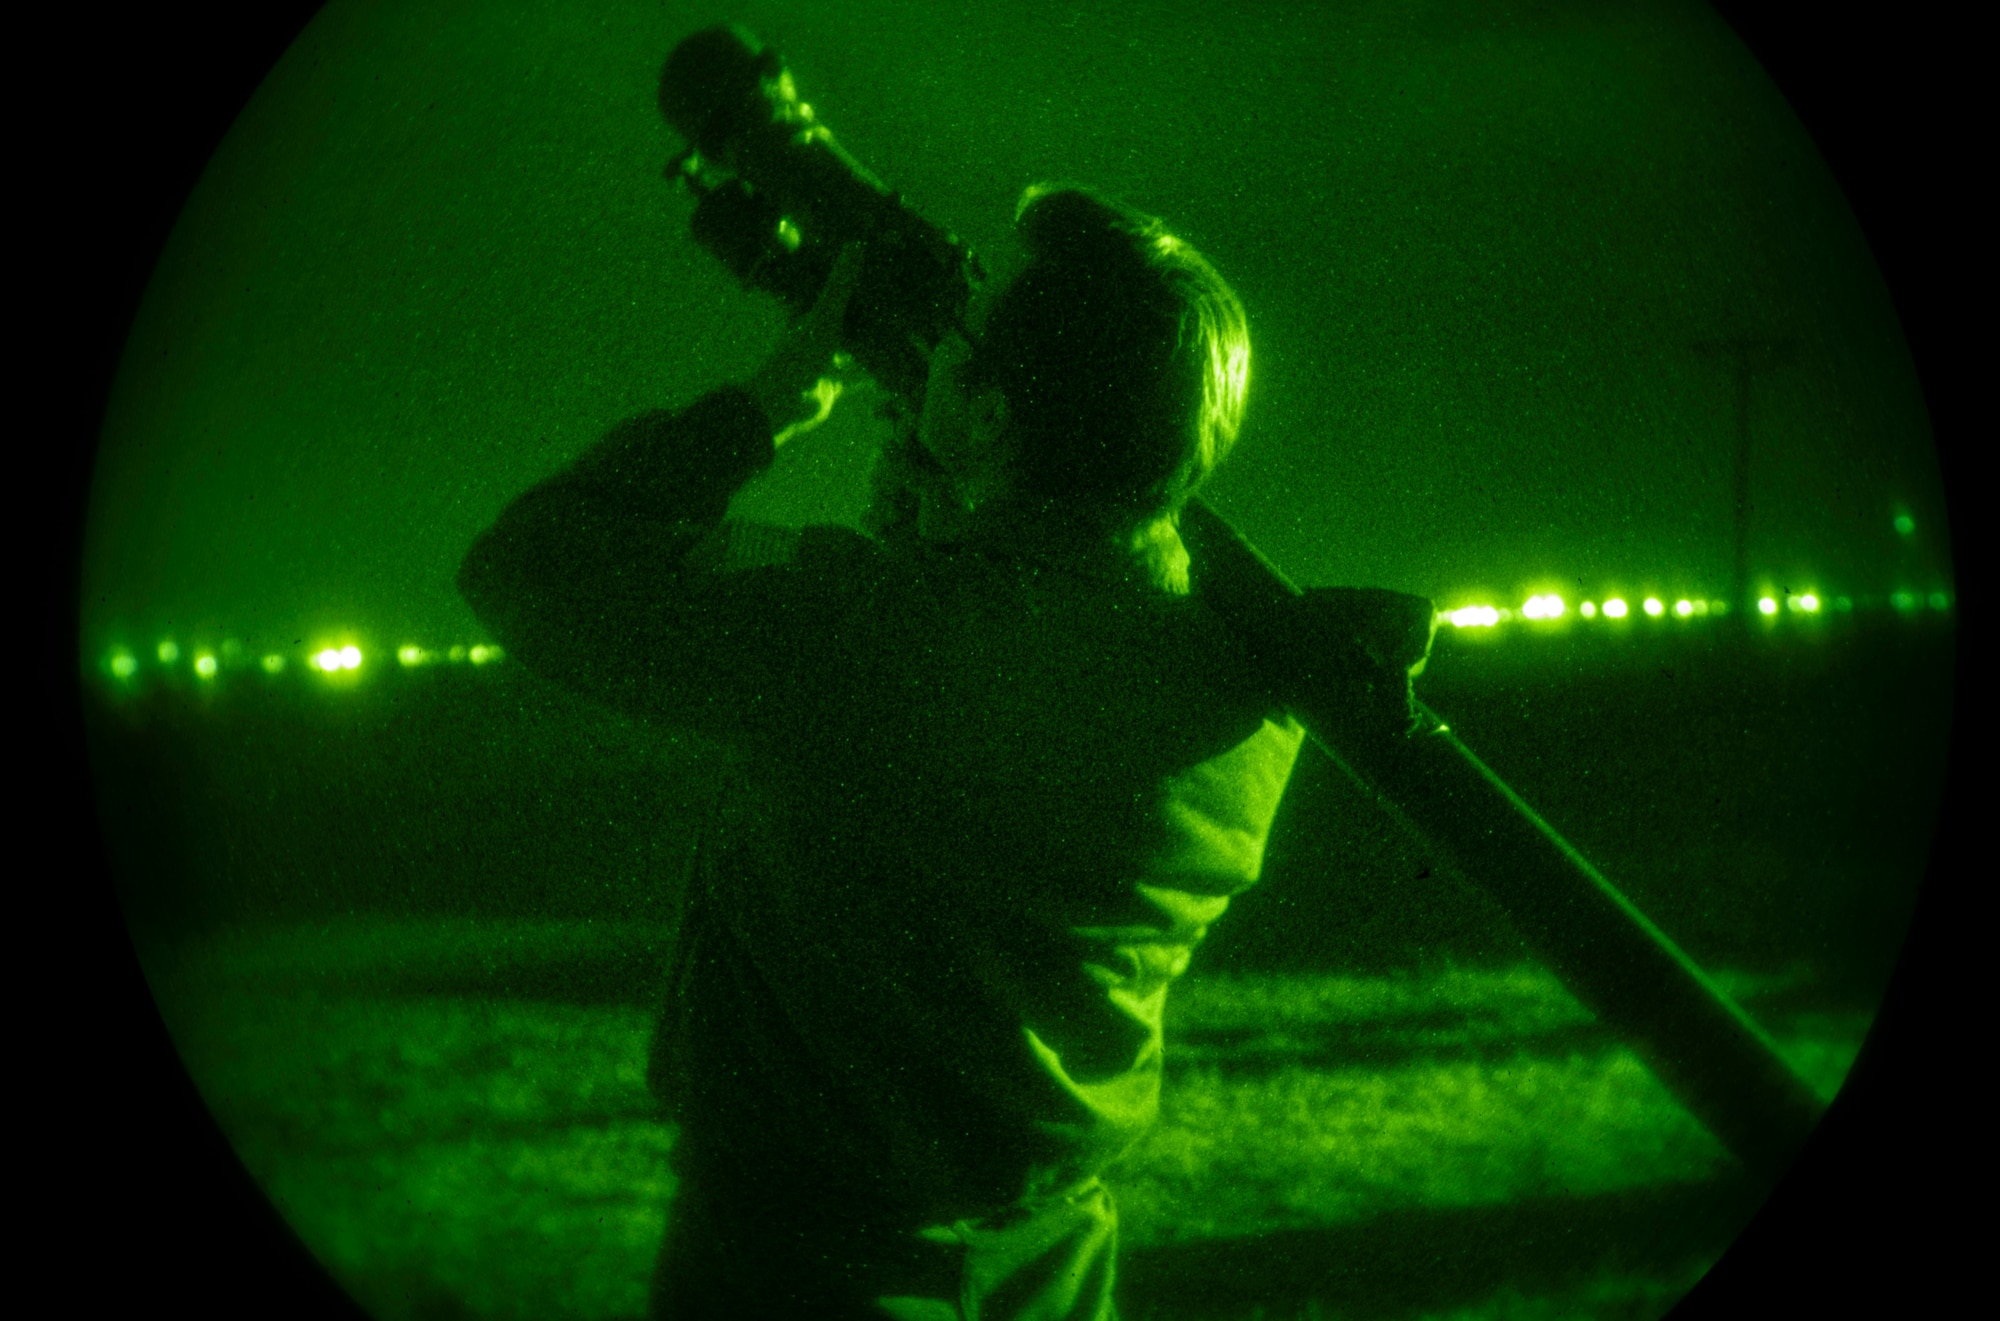 U.S. Air Force Senior Airman Josephus Straka, 909th Air Refueling Squadron in-flight refueling specialist, simulates nighttime ground threat using a training simulated man-portable air defense [missile] system during the threats and tactics phase of the 509th Weapons School (WPS) course at Roswell Air Center in Roswell, New Mexico, March 15, 2023. 509th WPS Students performed hands-on training and gained perspective as the aggressor using simulated man-portable air defense [missile] systems (MANPADS).  (U.S. Air Force photo by 2nd Lt. Ariana Wilkinson)